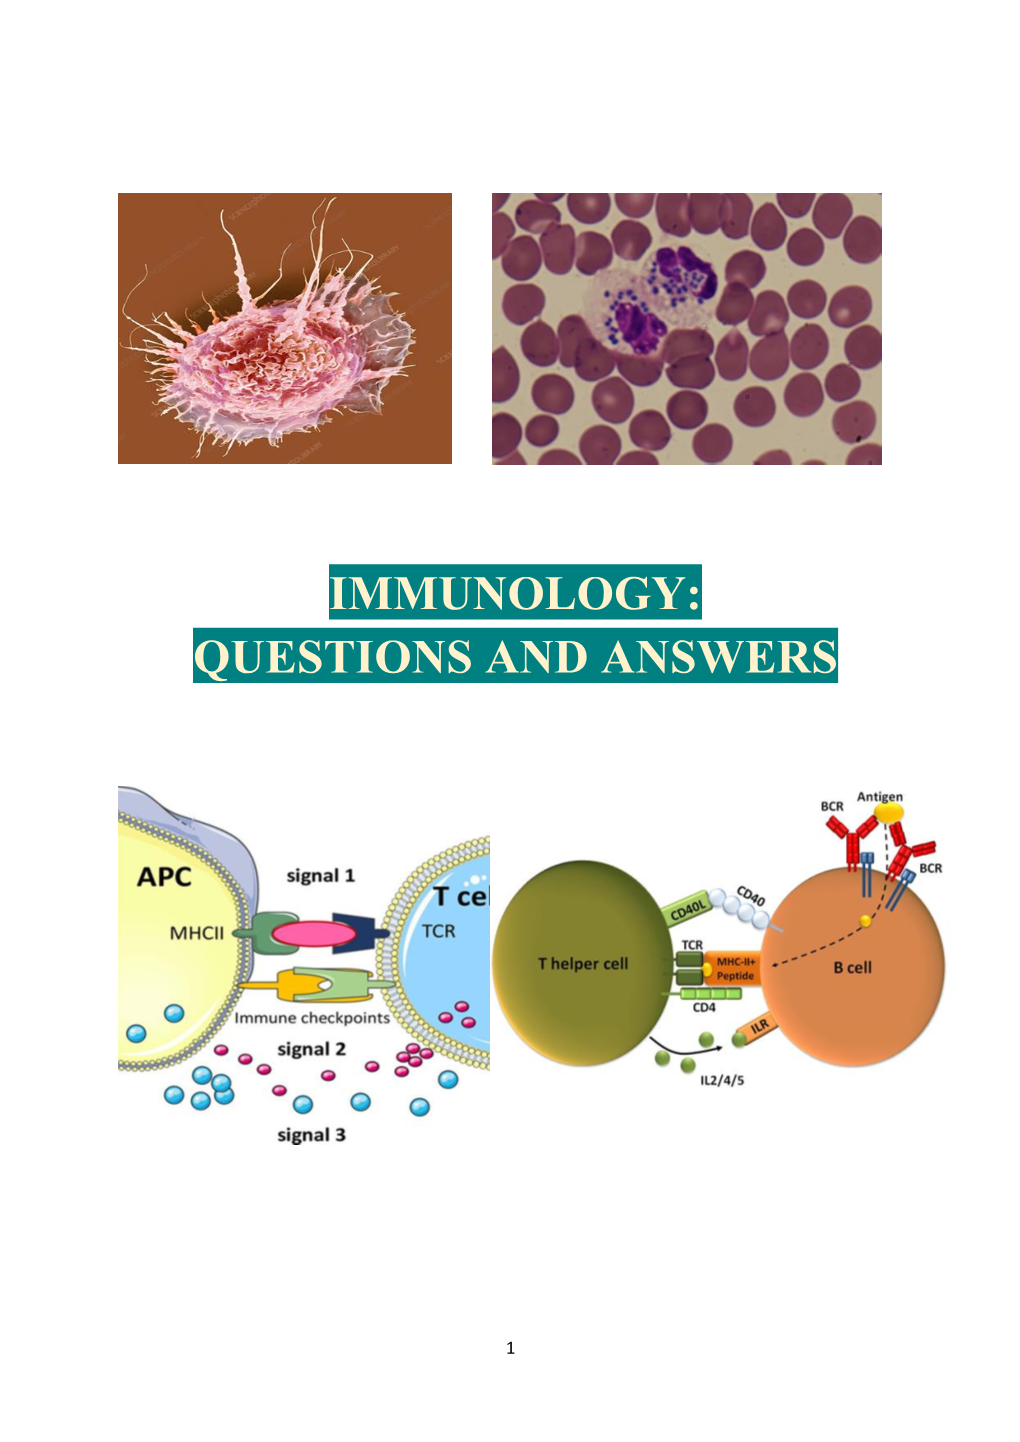 Immunology: Questions and Answers